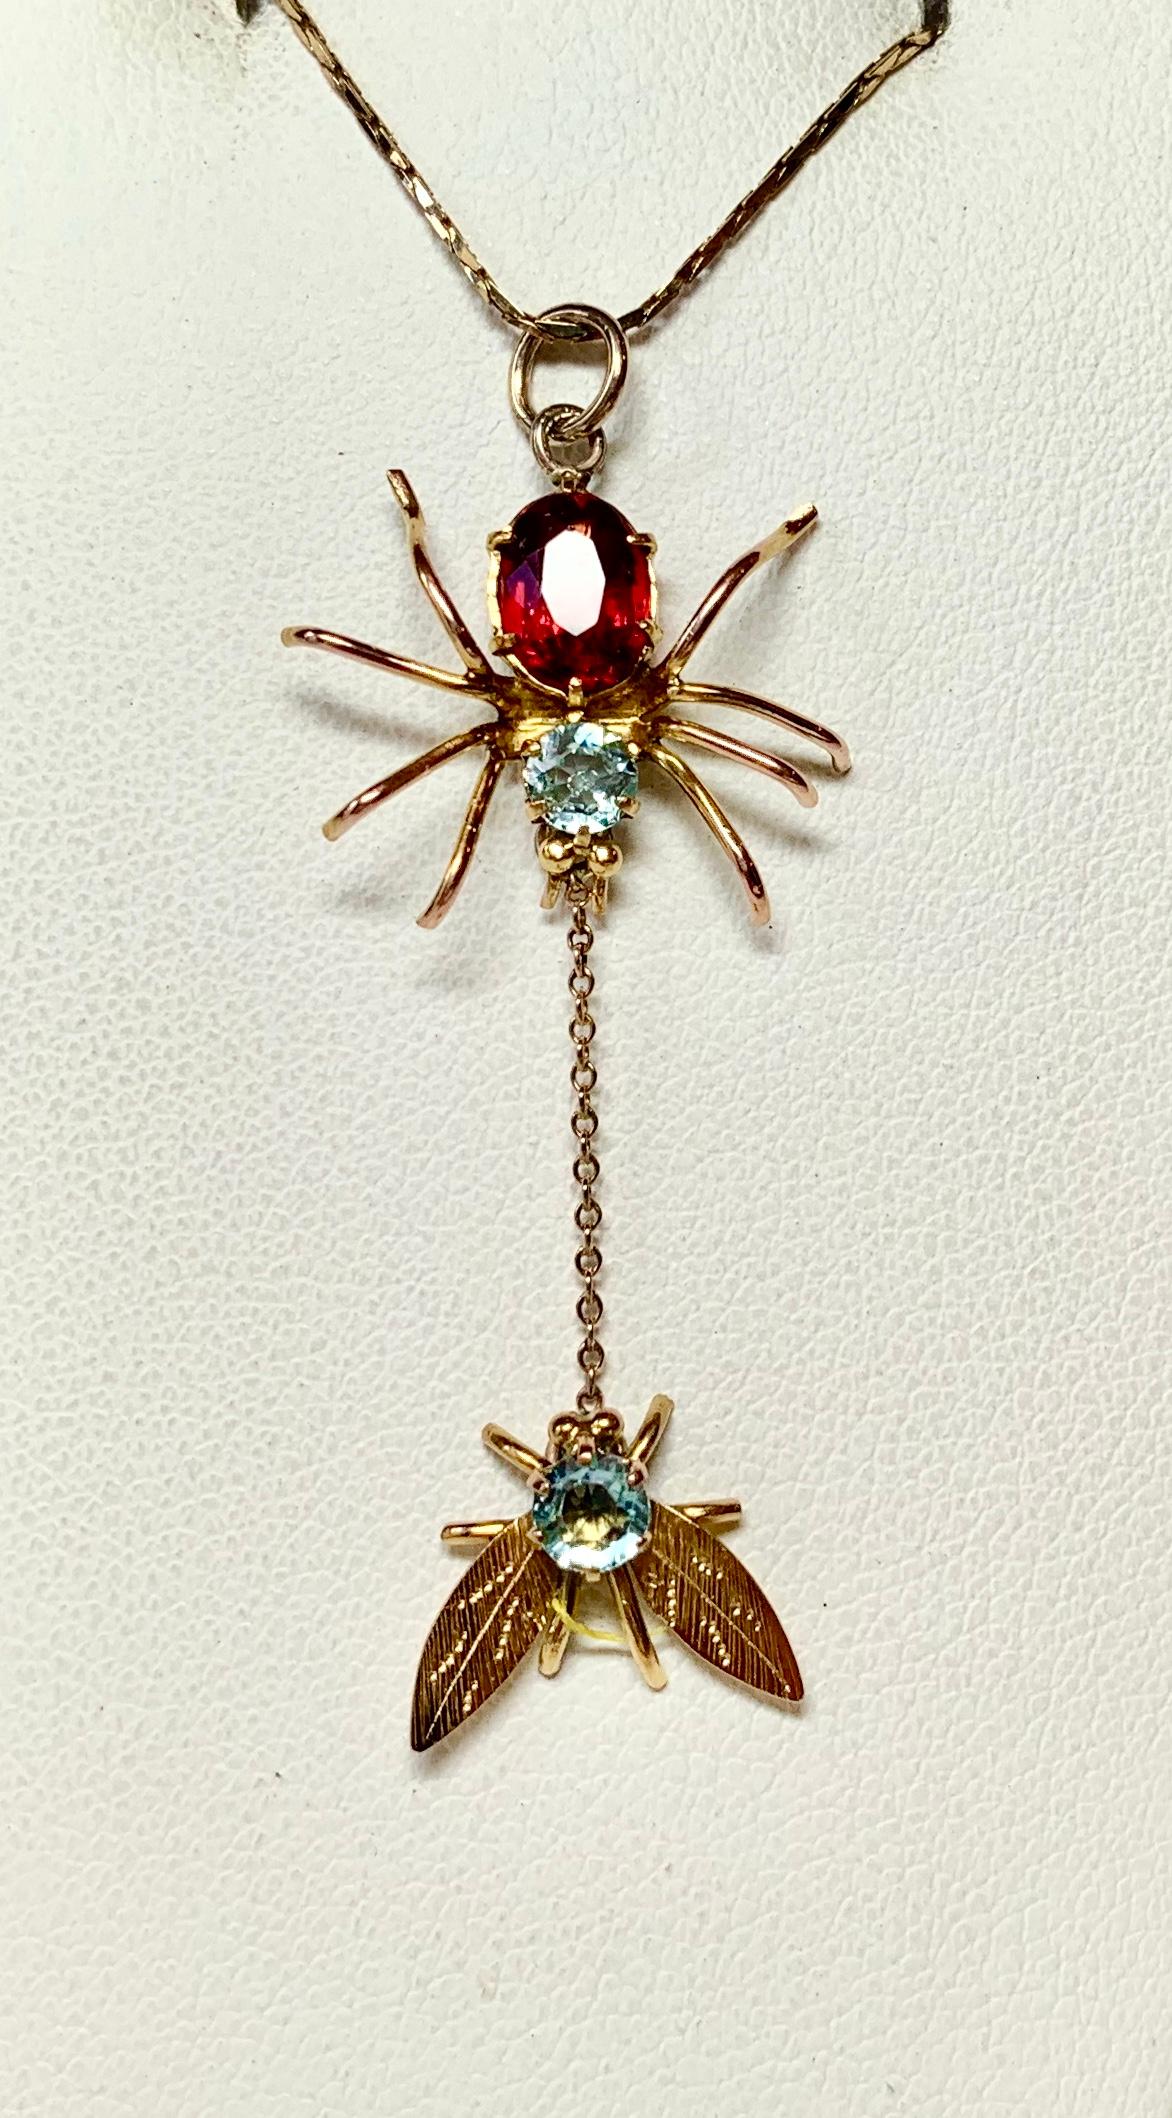 Round Cut Spider and Fly Insect Pendant Necklace Aquamarine Garnet Gold Antique Art Deco